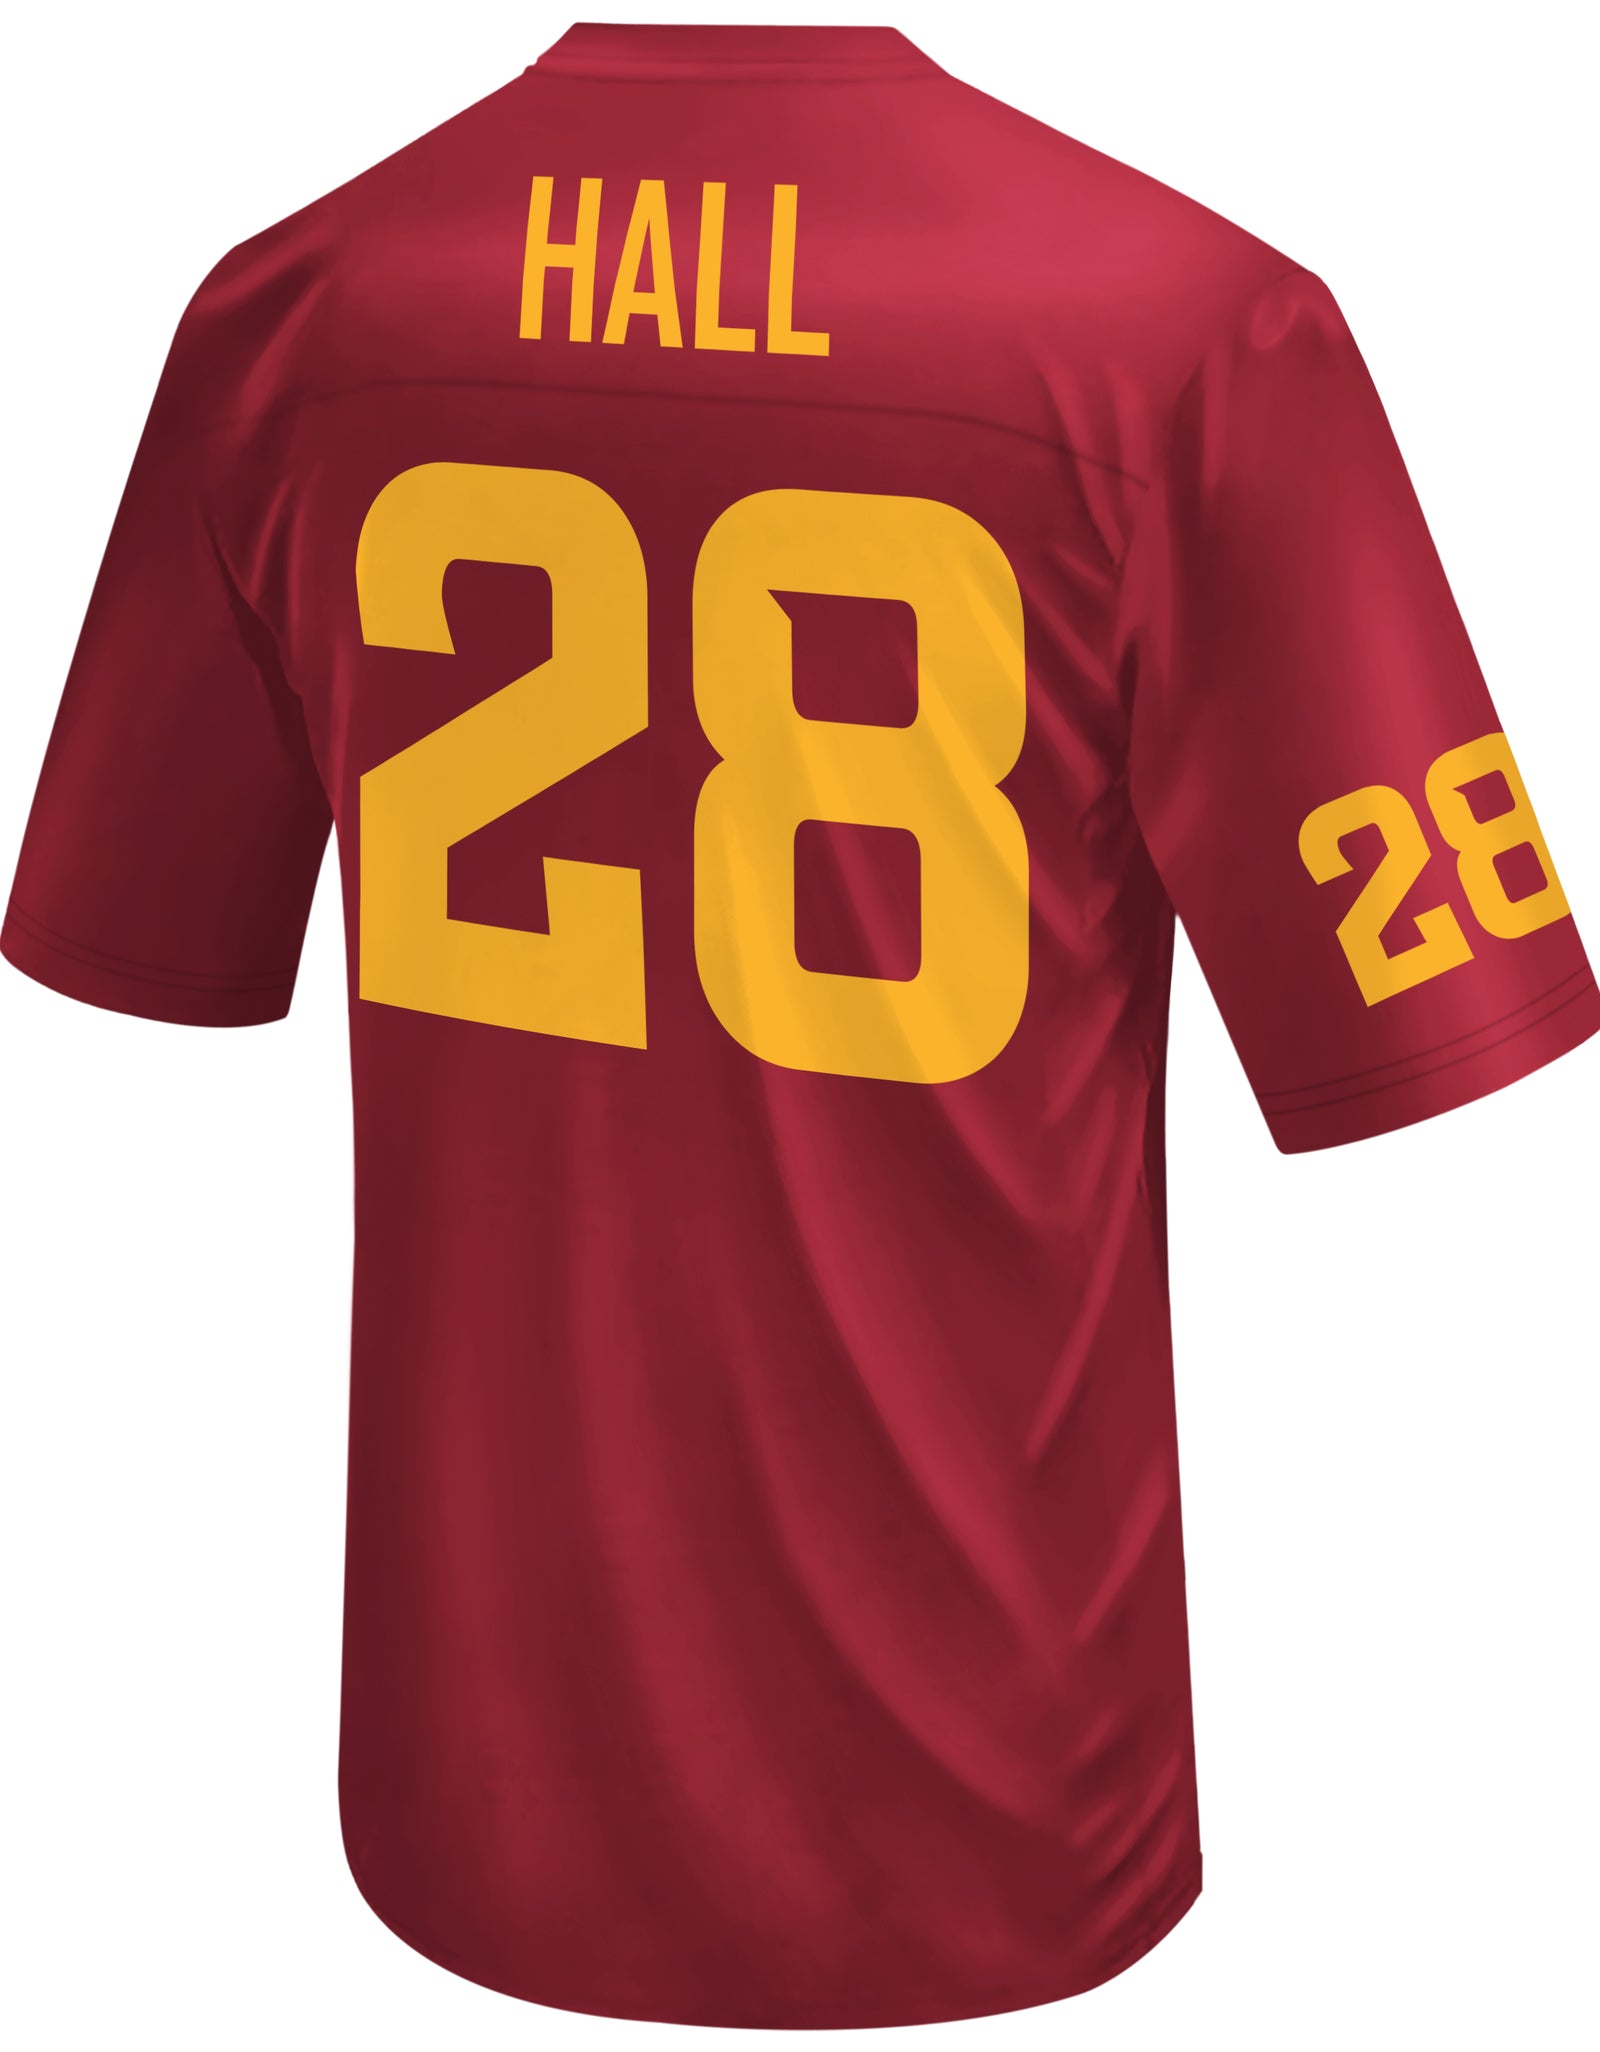 Iowa State Cyclones Breece Hall Throwback Jersey